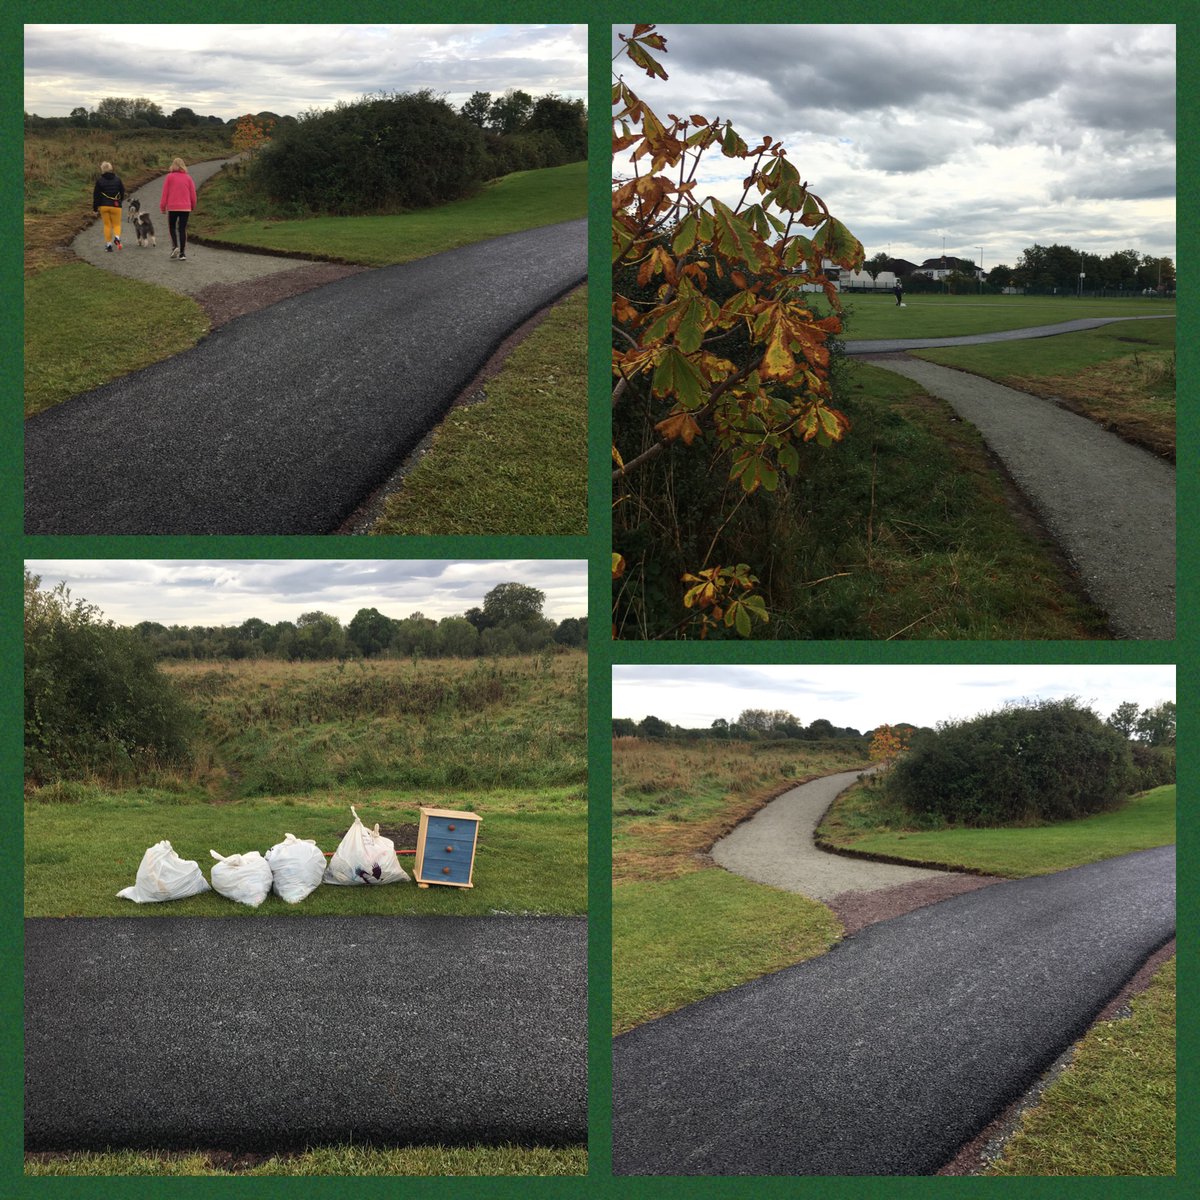 The new pathways are a great addition to our Park.
🏞️🏞️🏞️
Well done, @Fingalcoco!

@DanielWhooley @seanaorodaigh @KarenPowerComms @AoibhinnTormey @brianmcdonagh